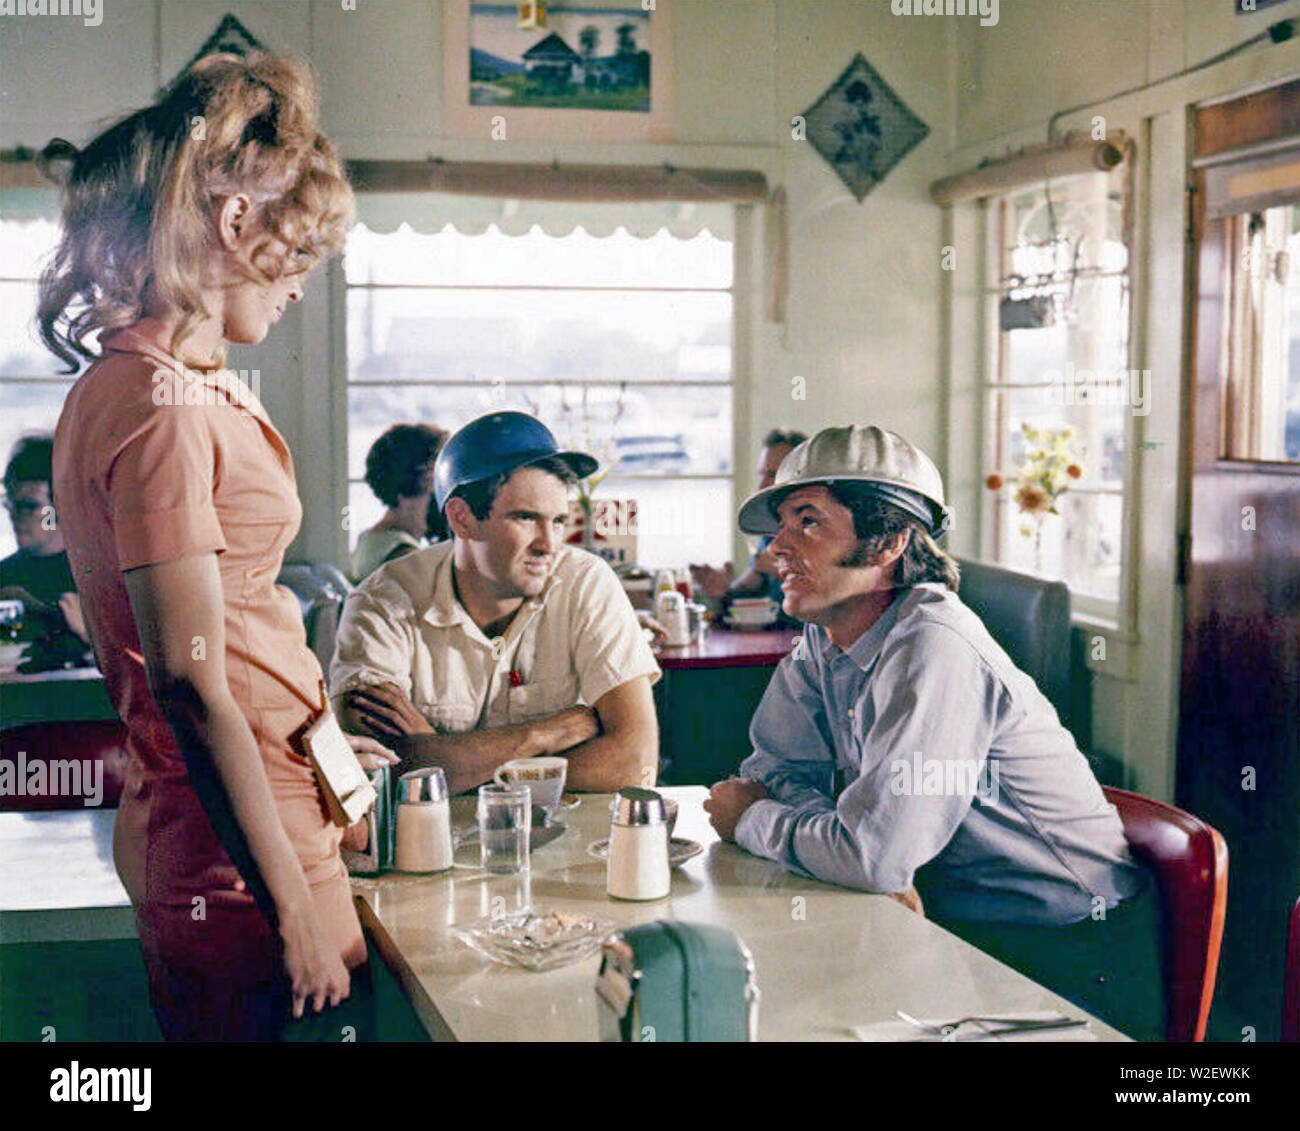 FIVE EASY PIECES 1970 Columbia Pictures film with Karen Black at left and Jack Nicholson at right Stock Photo